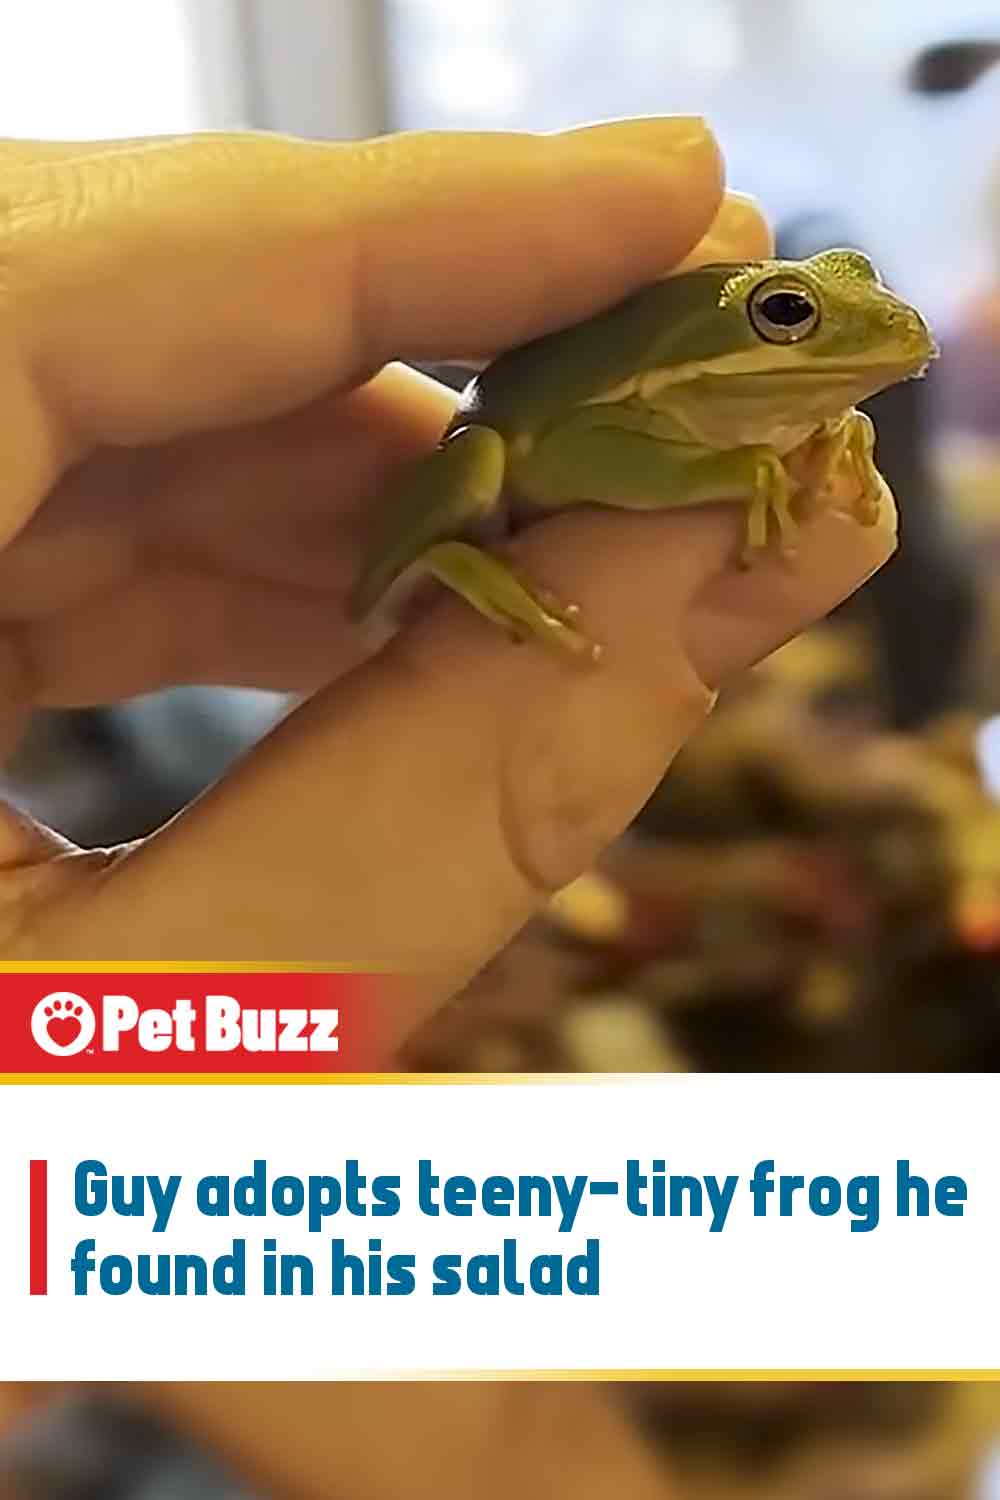 Guy adopts teeny-tiny frog he found in his salad